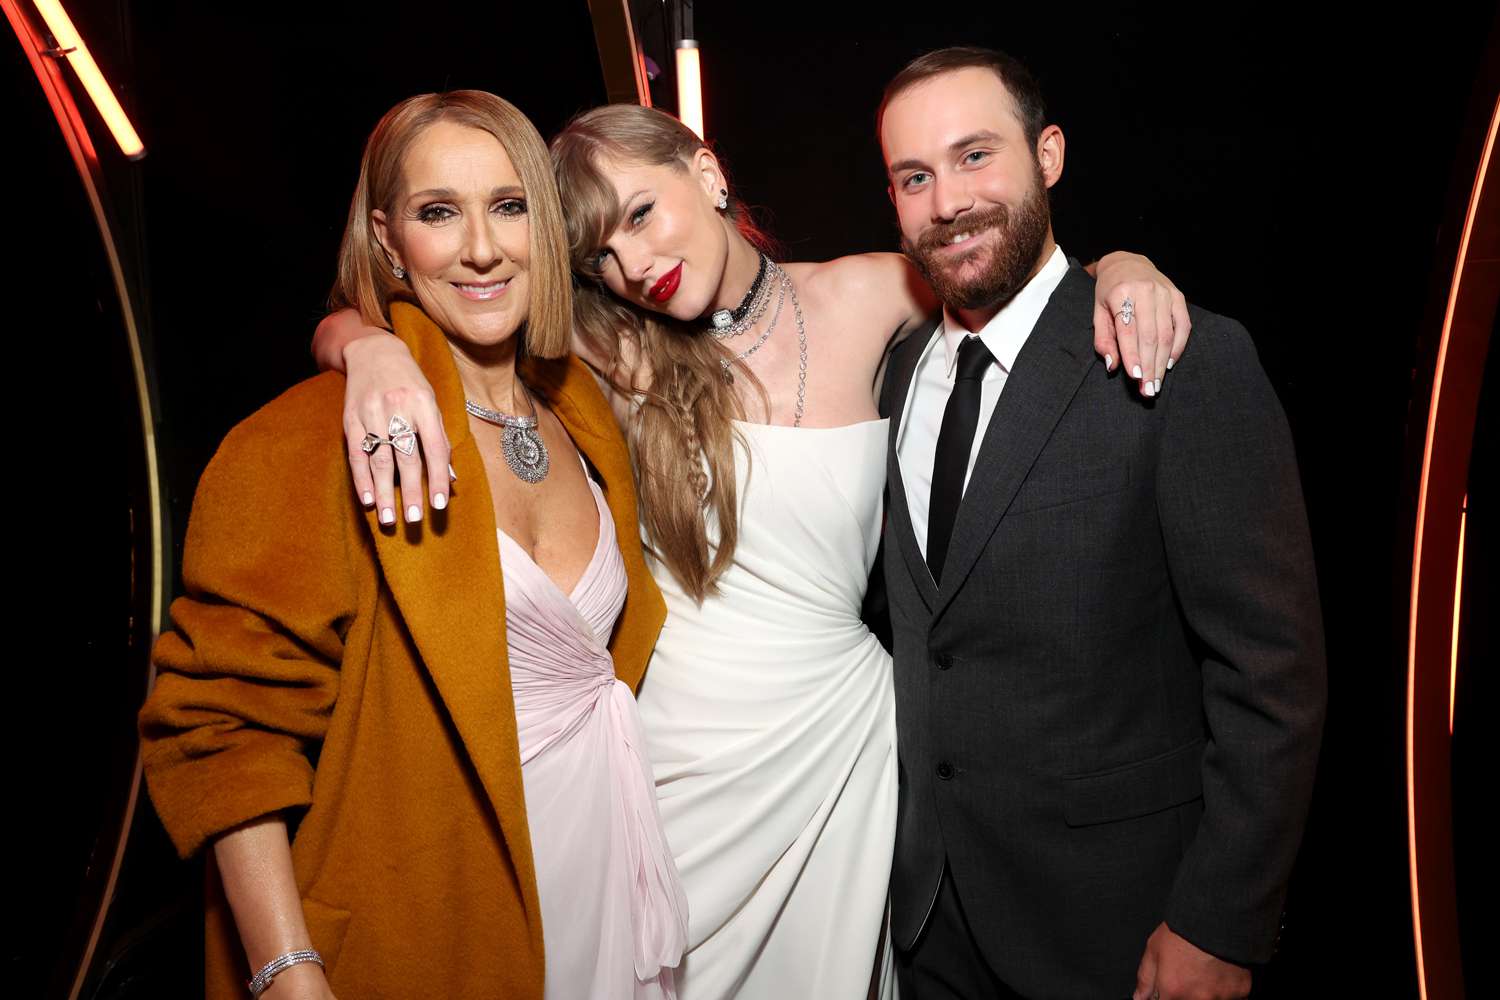 Grammy storm: Ariana Grande's brother hinted at criticizing Taylor Swift because of the drama with Celine Dion? - Photo 6.